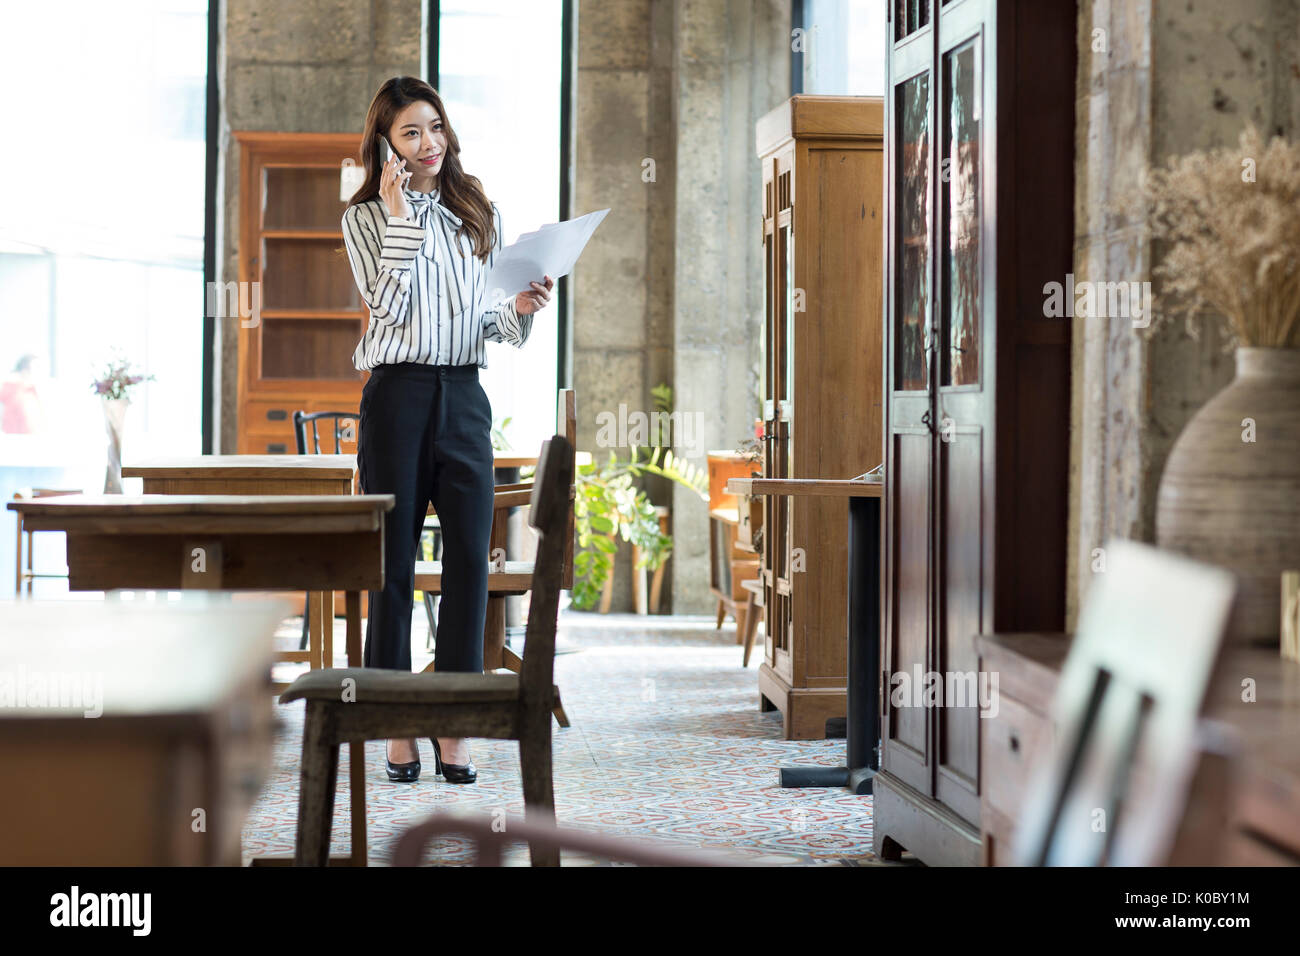 Young smiling female furniture expert talking on cellphone at shop Stock Photo